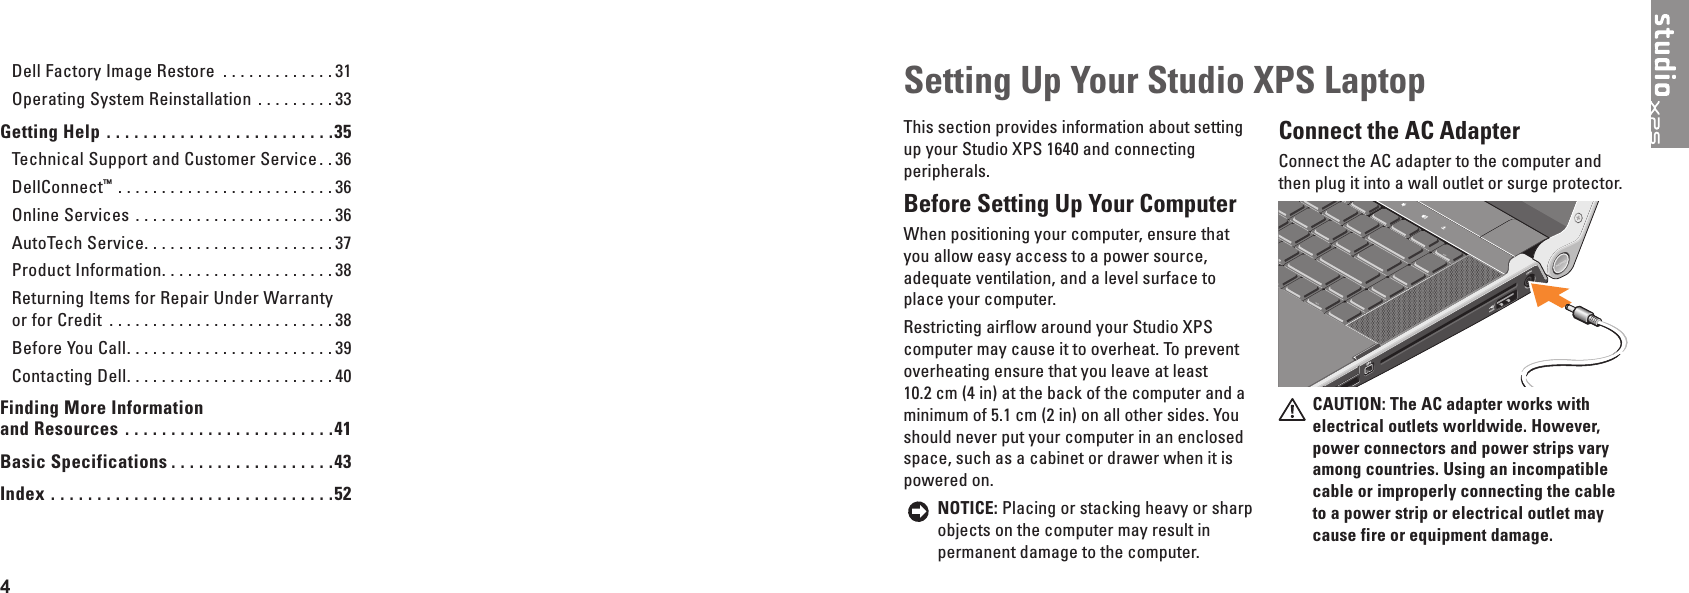 4  Setting Up Your Studio XPS LaptopThis section provides information about setting up your Studio XPS 1640 and connecting peripherals. Before Setting Up Your Computer When positioning your computer, ensure that you allow easy access to a power source, adequate ventilation, and a level surface to place your computer.Restricting airflow around your Studio XPS computer may cause it to overheat. To prevent overheating ensure that you leave at least 10.2 cm (4 in) at the back of the computer and a minimum of 5.1 cm (2 in) on all other sides. You should never put your computer in an enclosed space, such as a cabinet or drawer when it is powered on. NOTICE: Placing or stacking heavy or sharp objects on the computer may result in permanent damage to the computer.Connect the AC Adapter Connect the AC adapter to the computer and then plug it into a wall outlet or surge protector.CAUTION: The AC adapter works with electrical outlets worldwide� However, power connectors and power strips vary among countries� Using an incompatible cable or improperly connecting the cable to a power strip or electrical outlet may cause fire or equipment damage�Dell Factory Image Restore  . . . . . . . . . . . . . 31Operating System Reinstallation  . . . . . . . . . 33Getting Help  � � � � � � � � � � � � � � � � � � � � � � � � �35Technical Support and Customer Service . . 36DellConnect™ . . . . . . . . . . . . . . . . . . . . . . . . . 36Online Services  . . . . . . . . . . . . . . . . . . . . . . . 36AutoTech Service. . . . . . . . . . . . . . . . . . . . . . 37Product Information. . . . . . . . . . . . . . . . . . . . 38Returning Items for Repair Under Warranty or for Credit  . . . . . . . . . . . . . . . . . . . . . . . . . . 38Before You Call. . . . . . . . . . . . . . . . . . . . . . . . 39Contacting Dell. . . . . . . . . . . . . . . . . . . . . . . . 40Finding More Information  and Resources  � � � � � � � � � � � � � � � � � � � � � � �41Basic Specifications � � � � � � � � � � � � � � � � � �43Index  � � � � � � � � � � � � � � � � � � � � � � � � � � � � � � �52